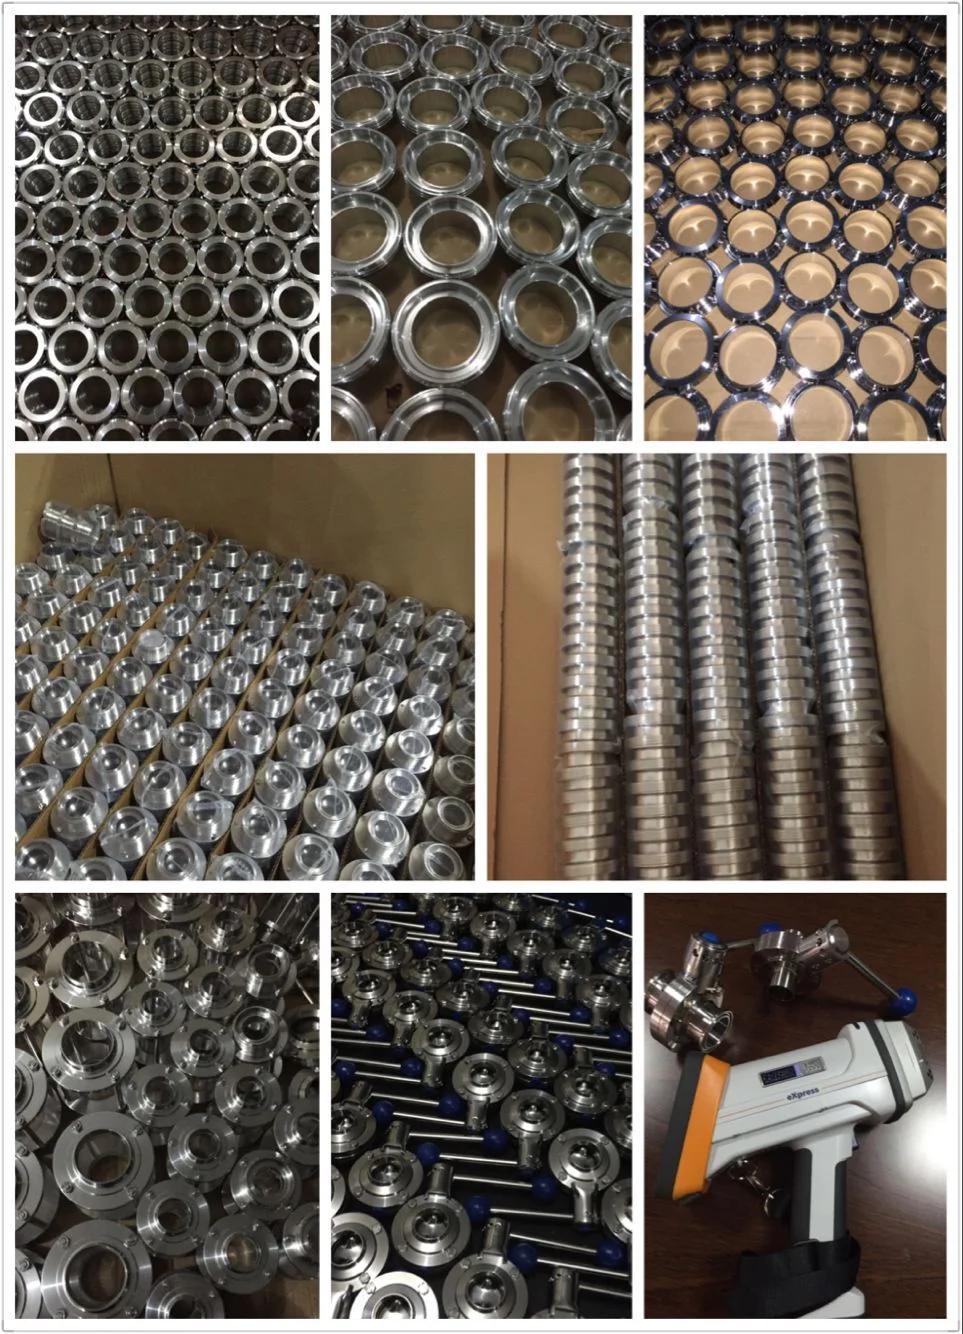 SMS Sanitary Stainless Steel Pipe Fittings Tee Without Straight End